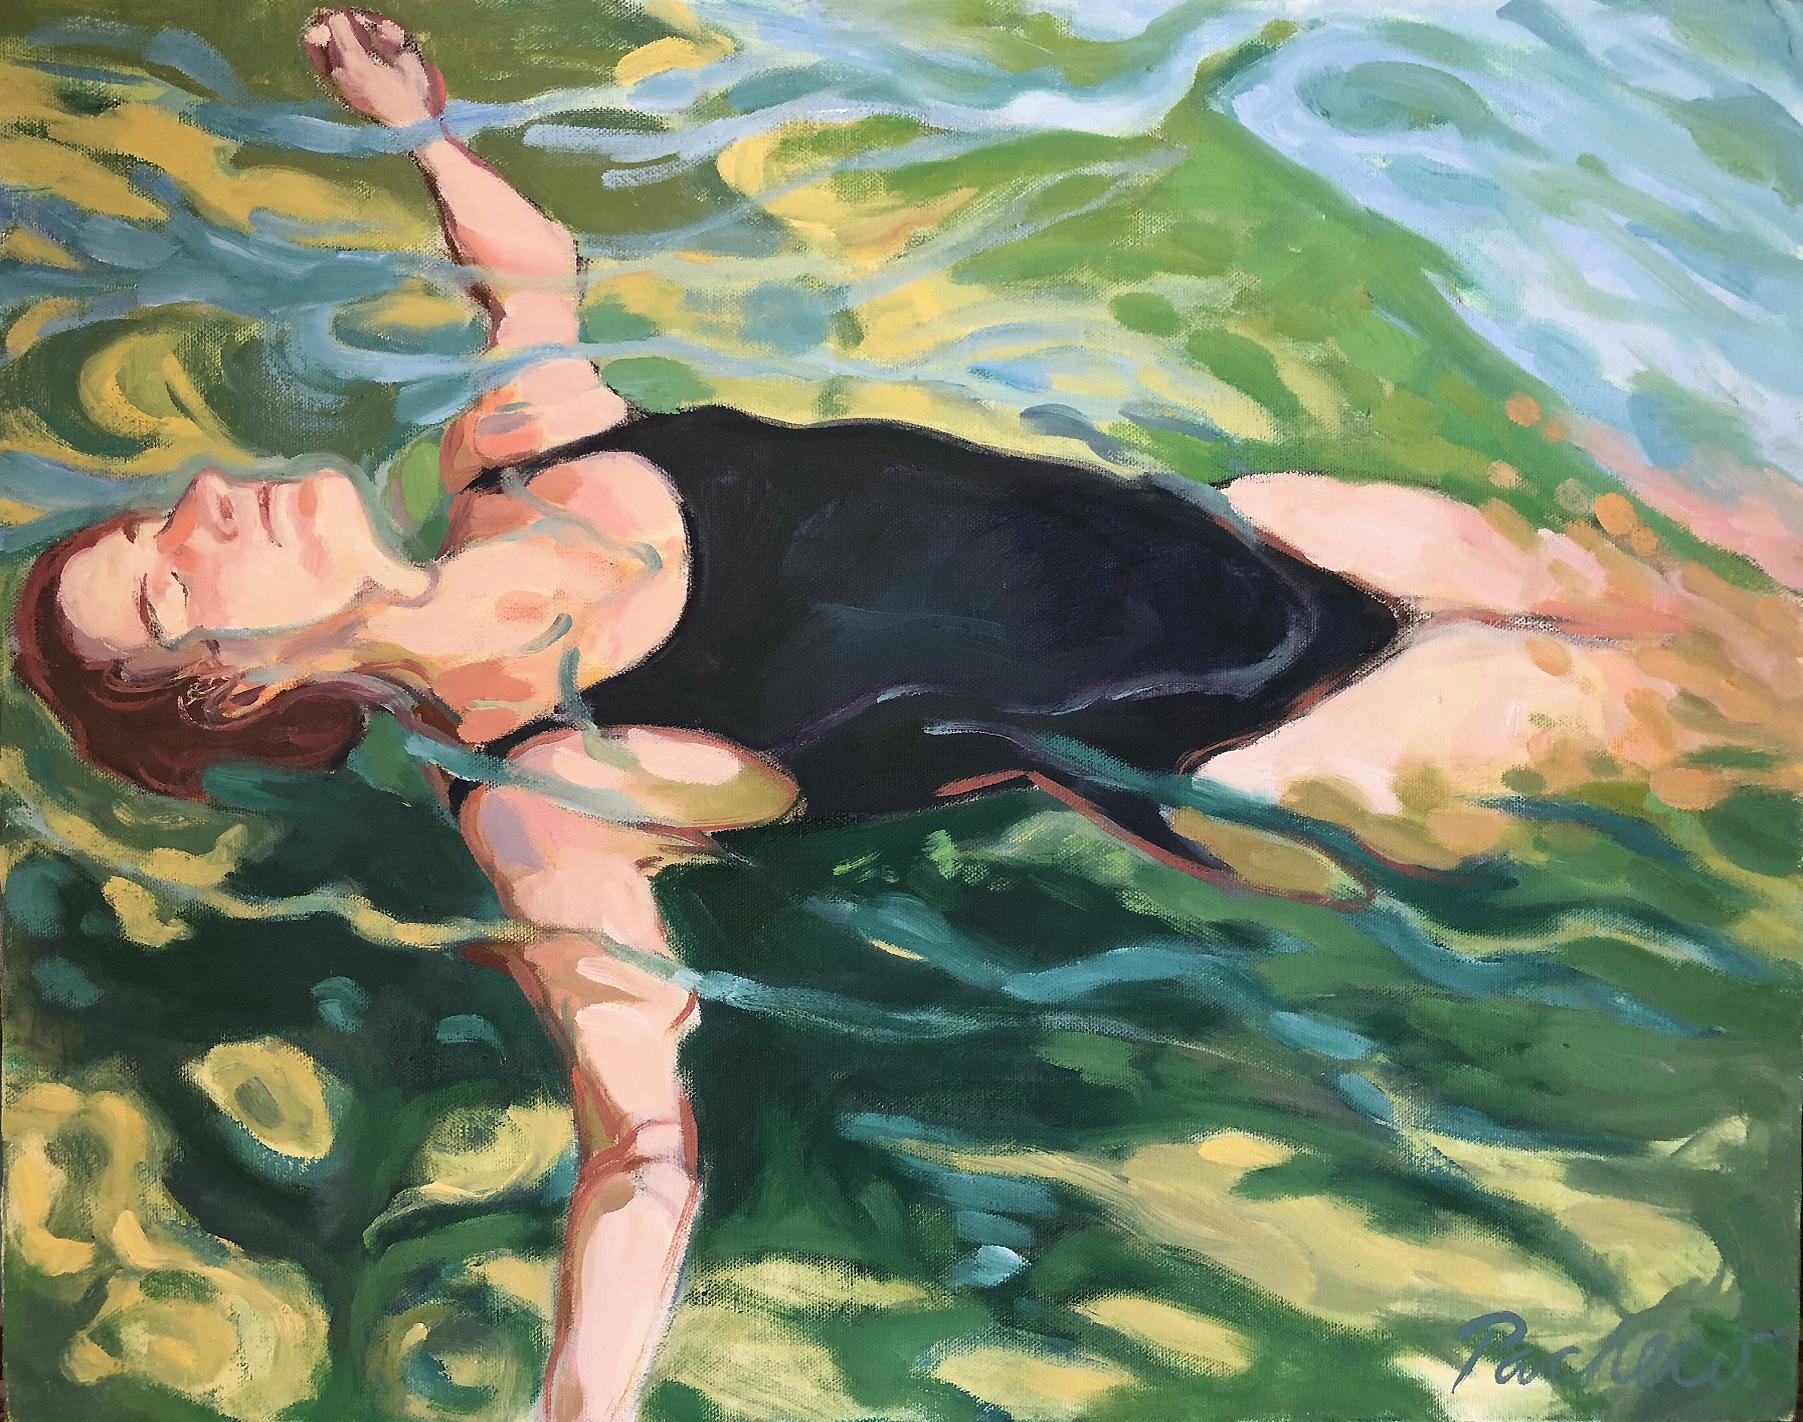 Suzie Pacheco Figurative Painting - In Her Element, Martha's Vineyard, The Figure & the Sea, Oil on Canvas